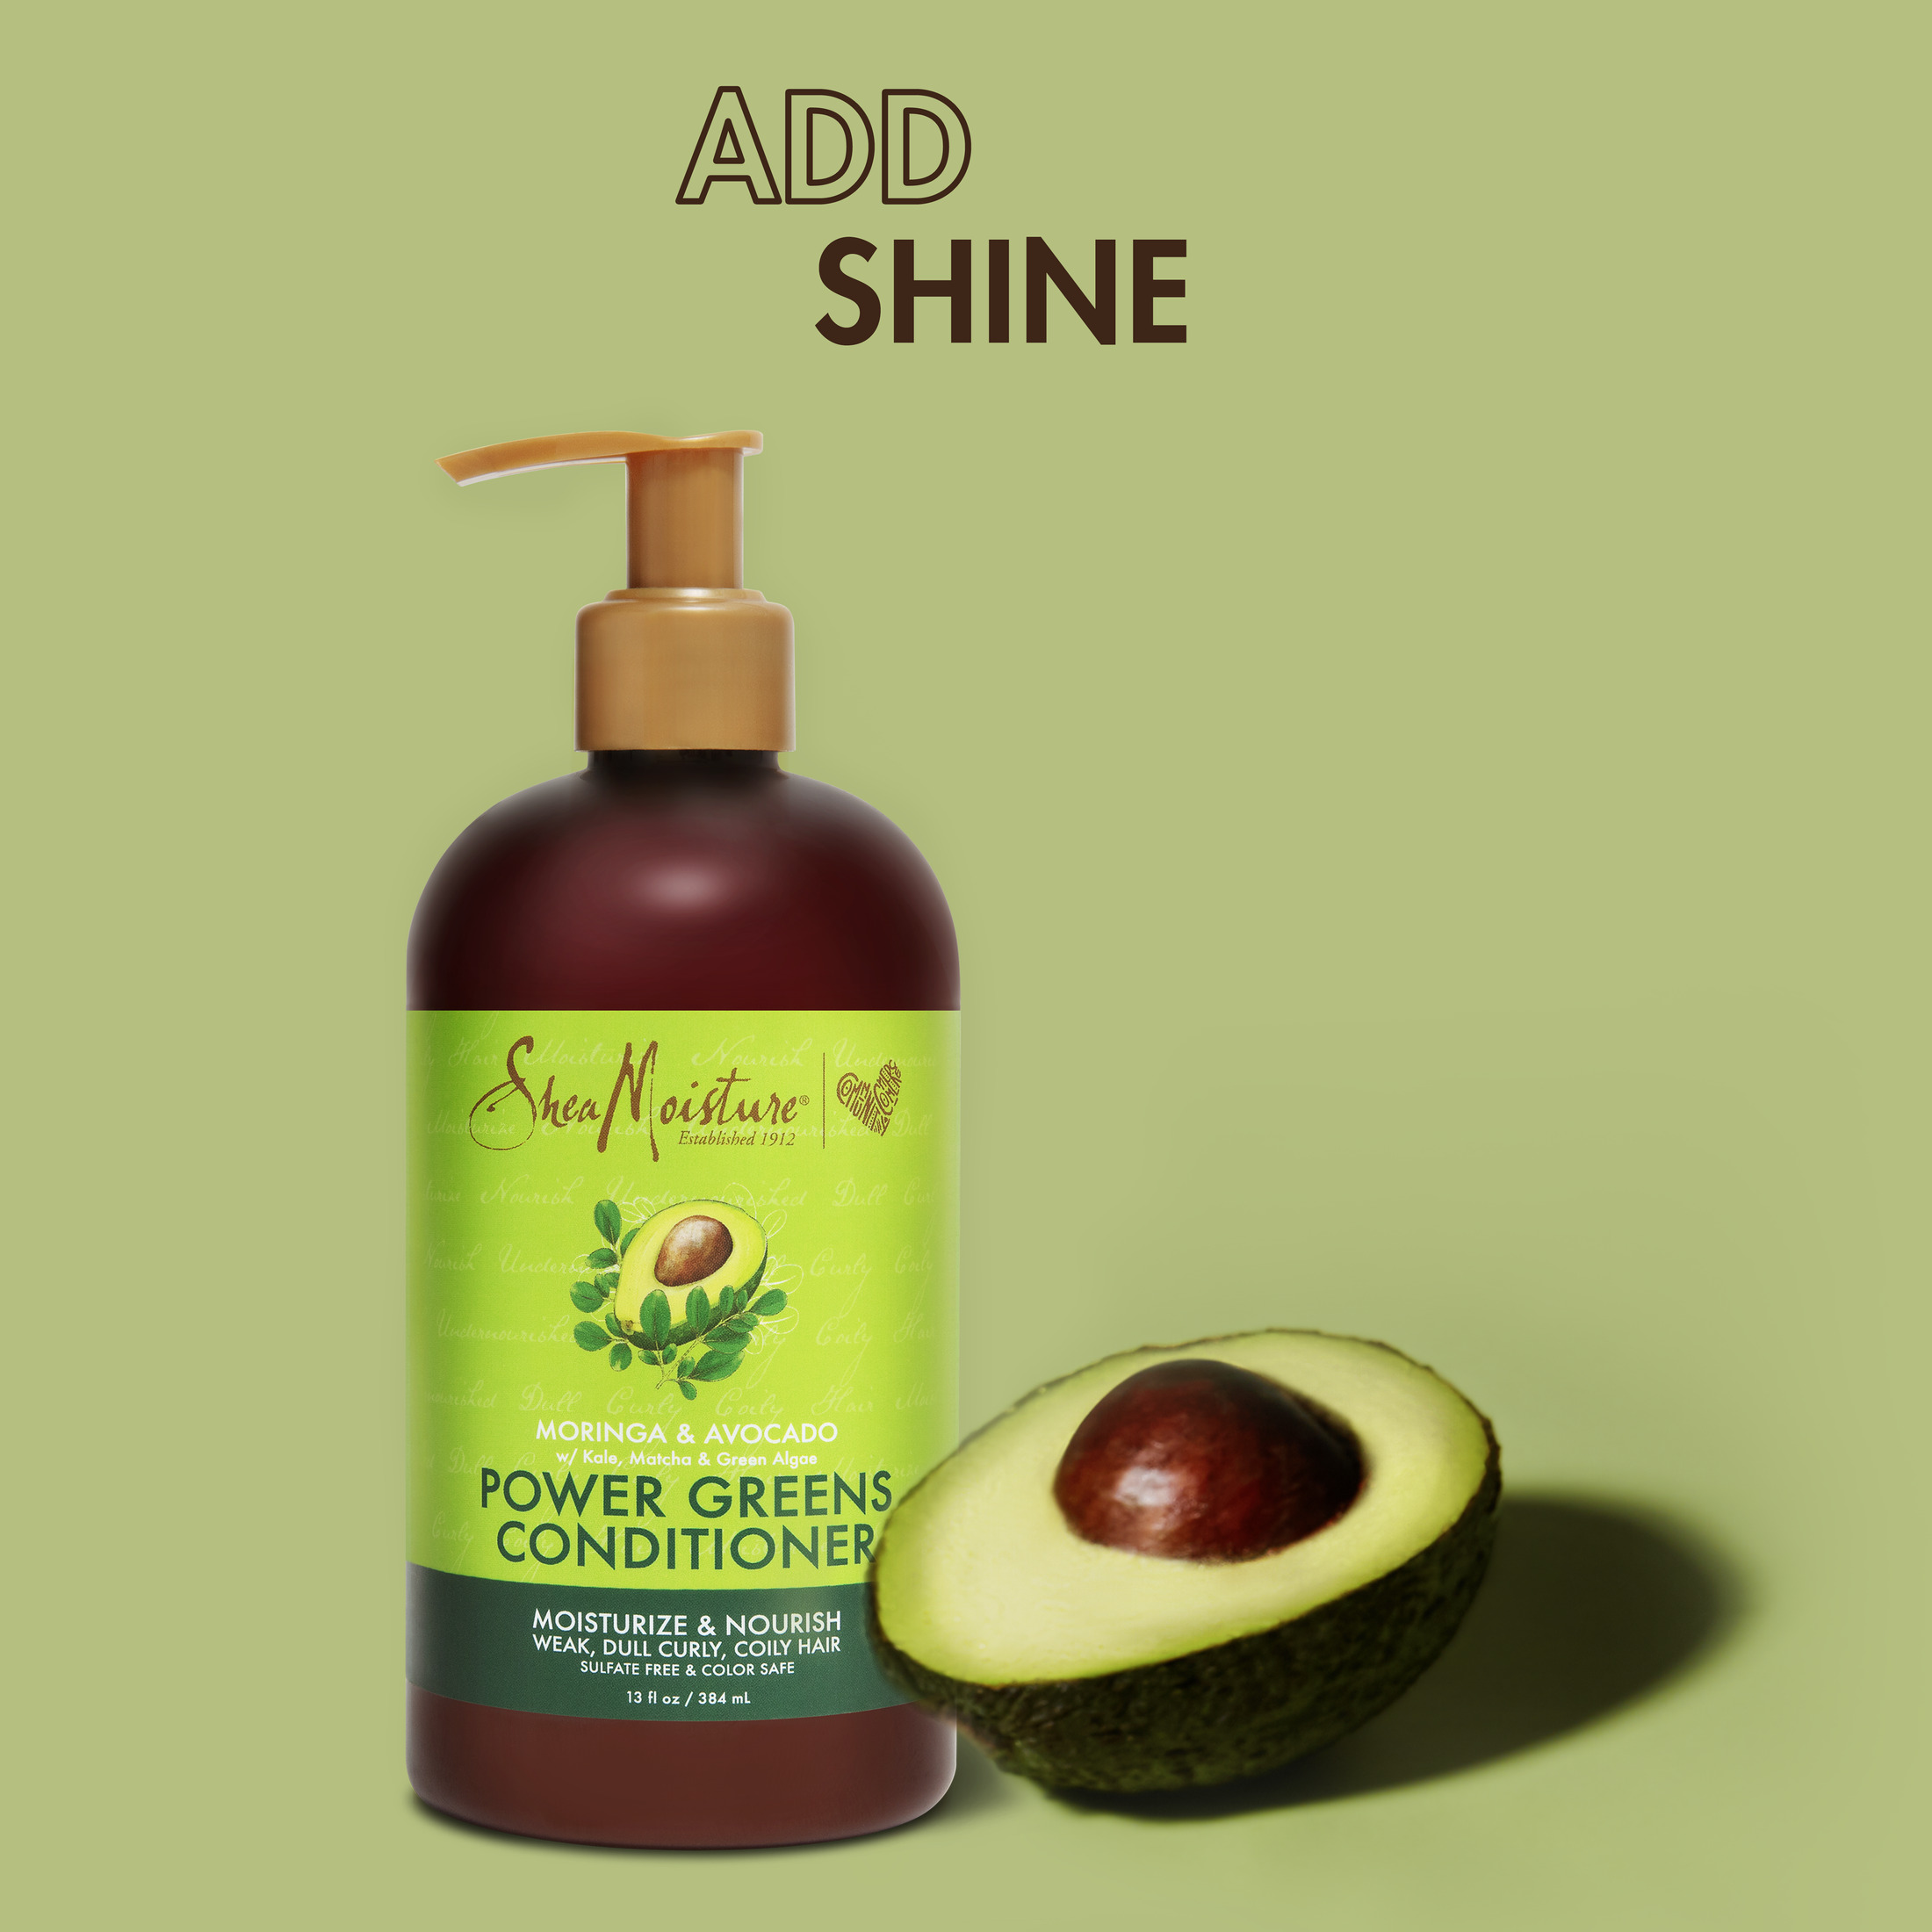 SheaMoisture Power Greens Deep Conditioner for Curly Hair with Kale, Moringa and Avocado, 13 fl oz - image 5 of 12